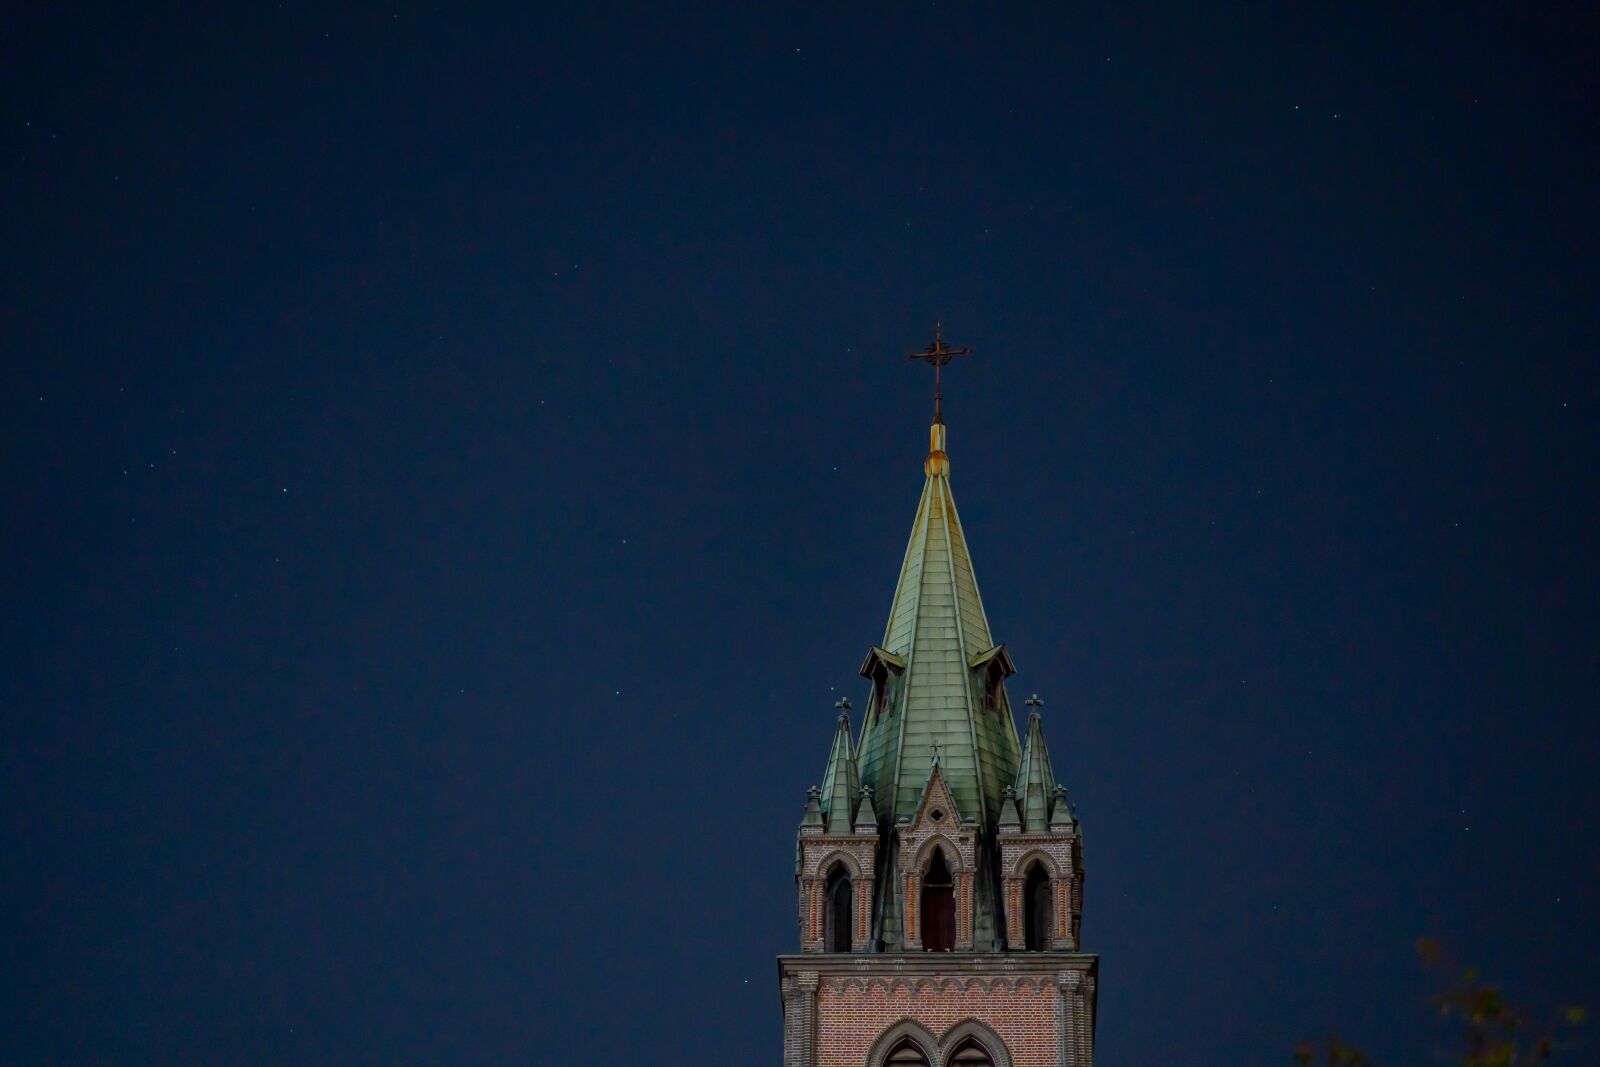 Sony a7 III + Sony FE 85mm F1.4 GM sample photo. Night, cathedral, church photography